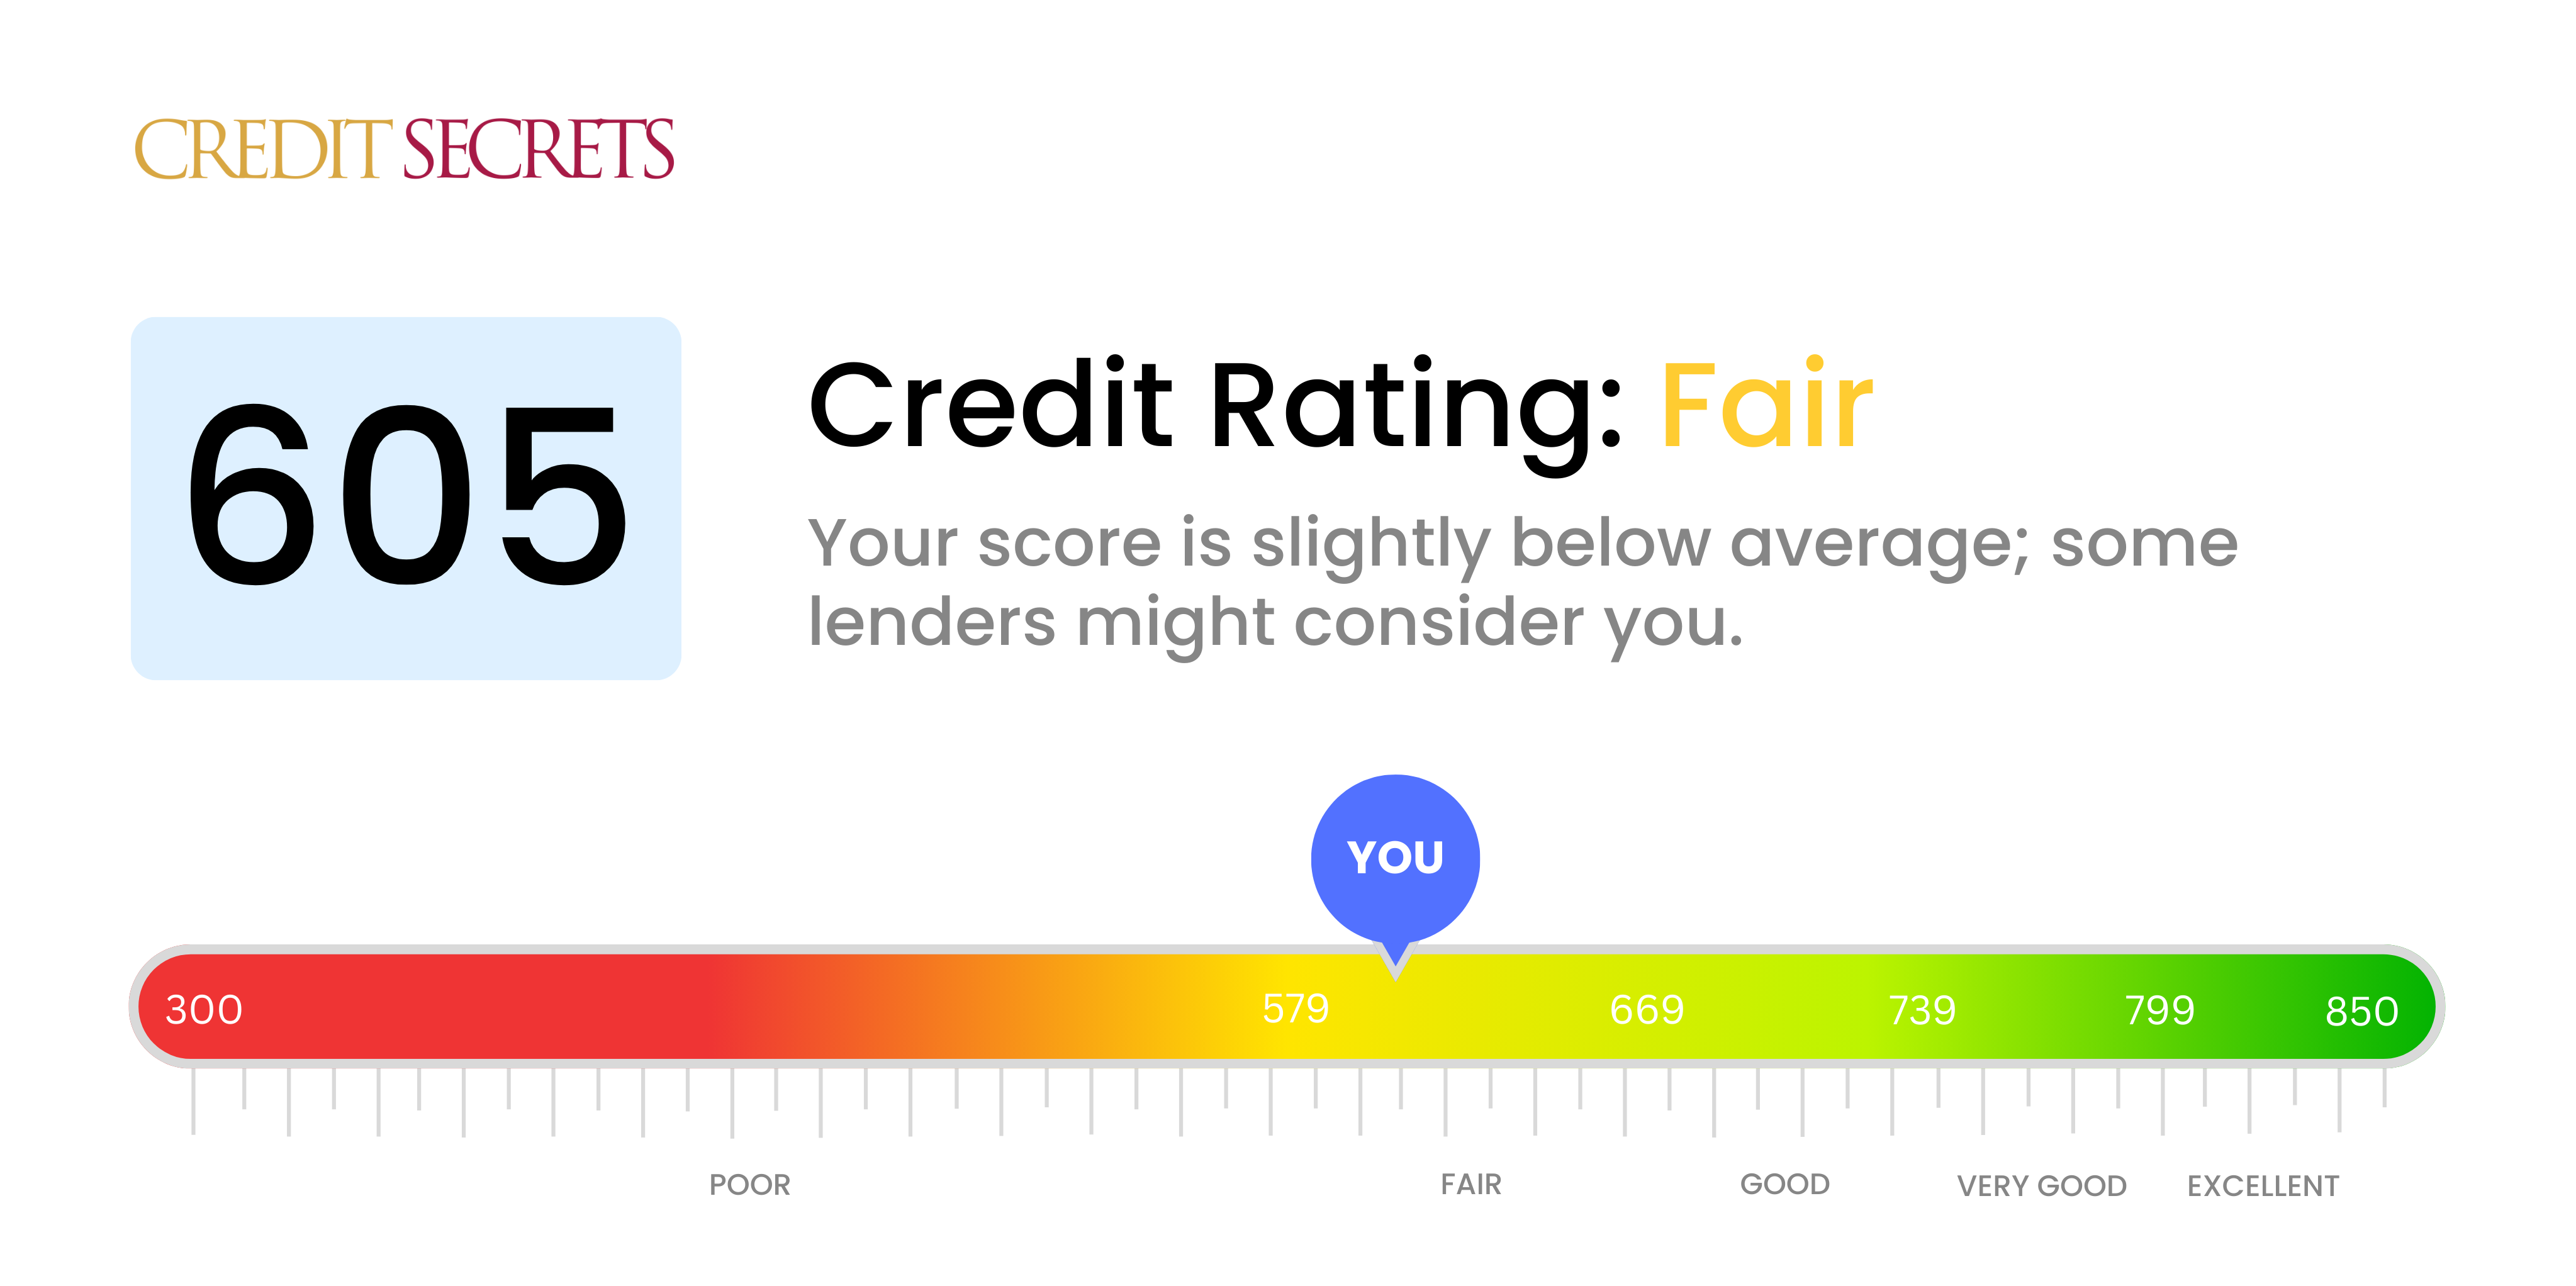 Is 605 a good credit score?